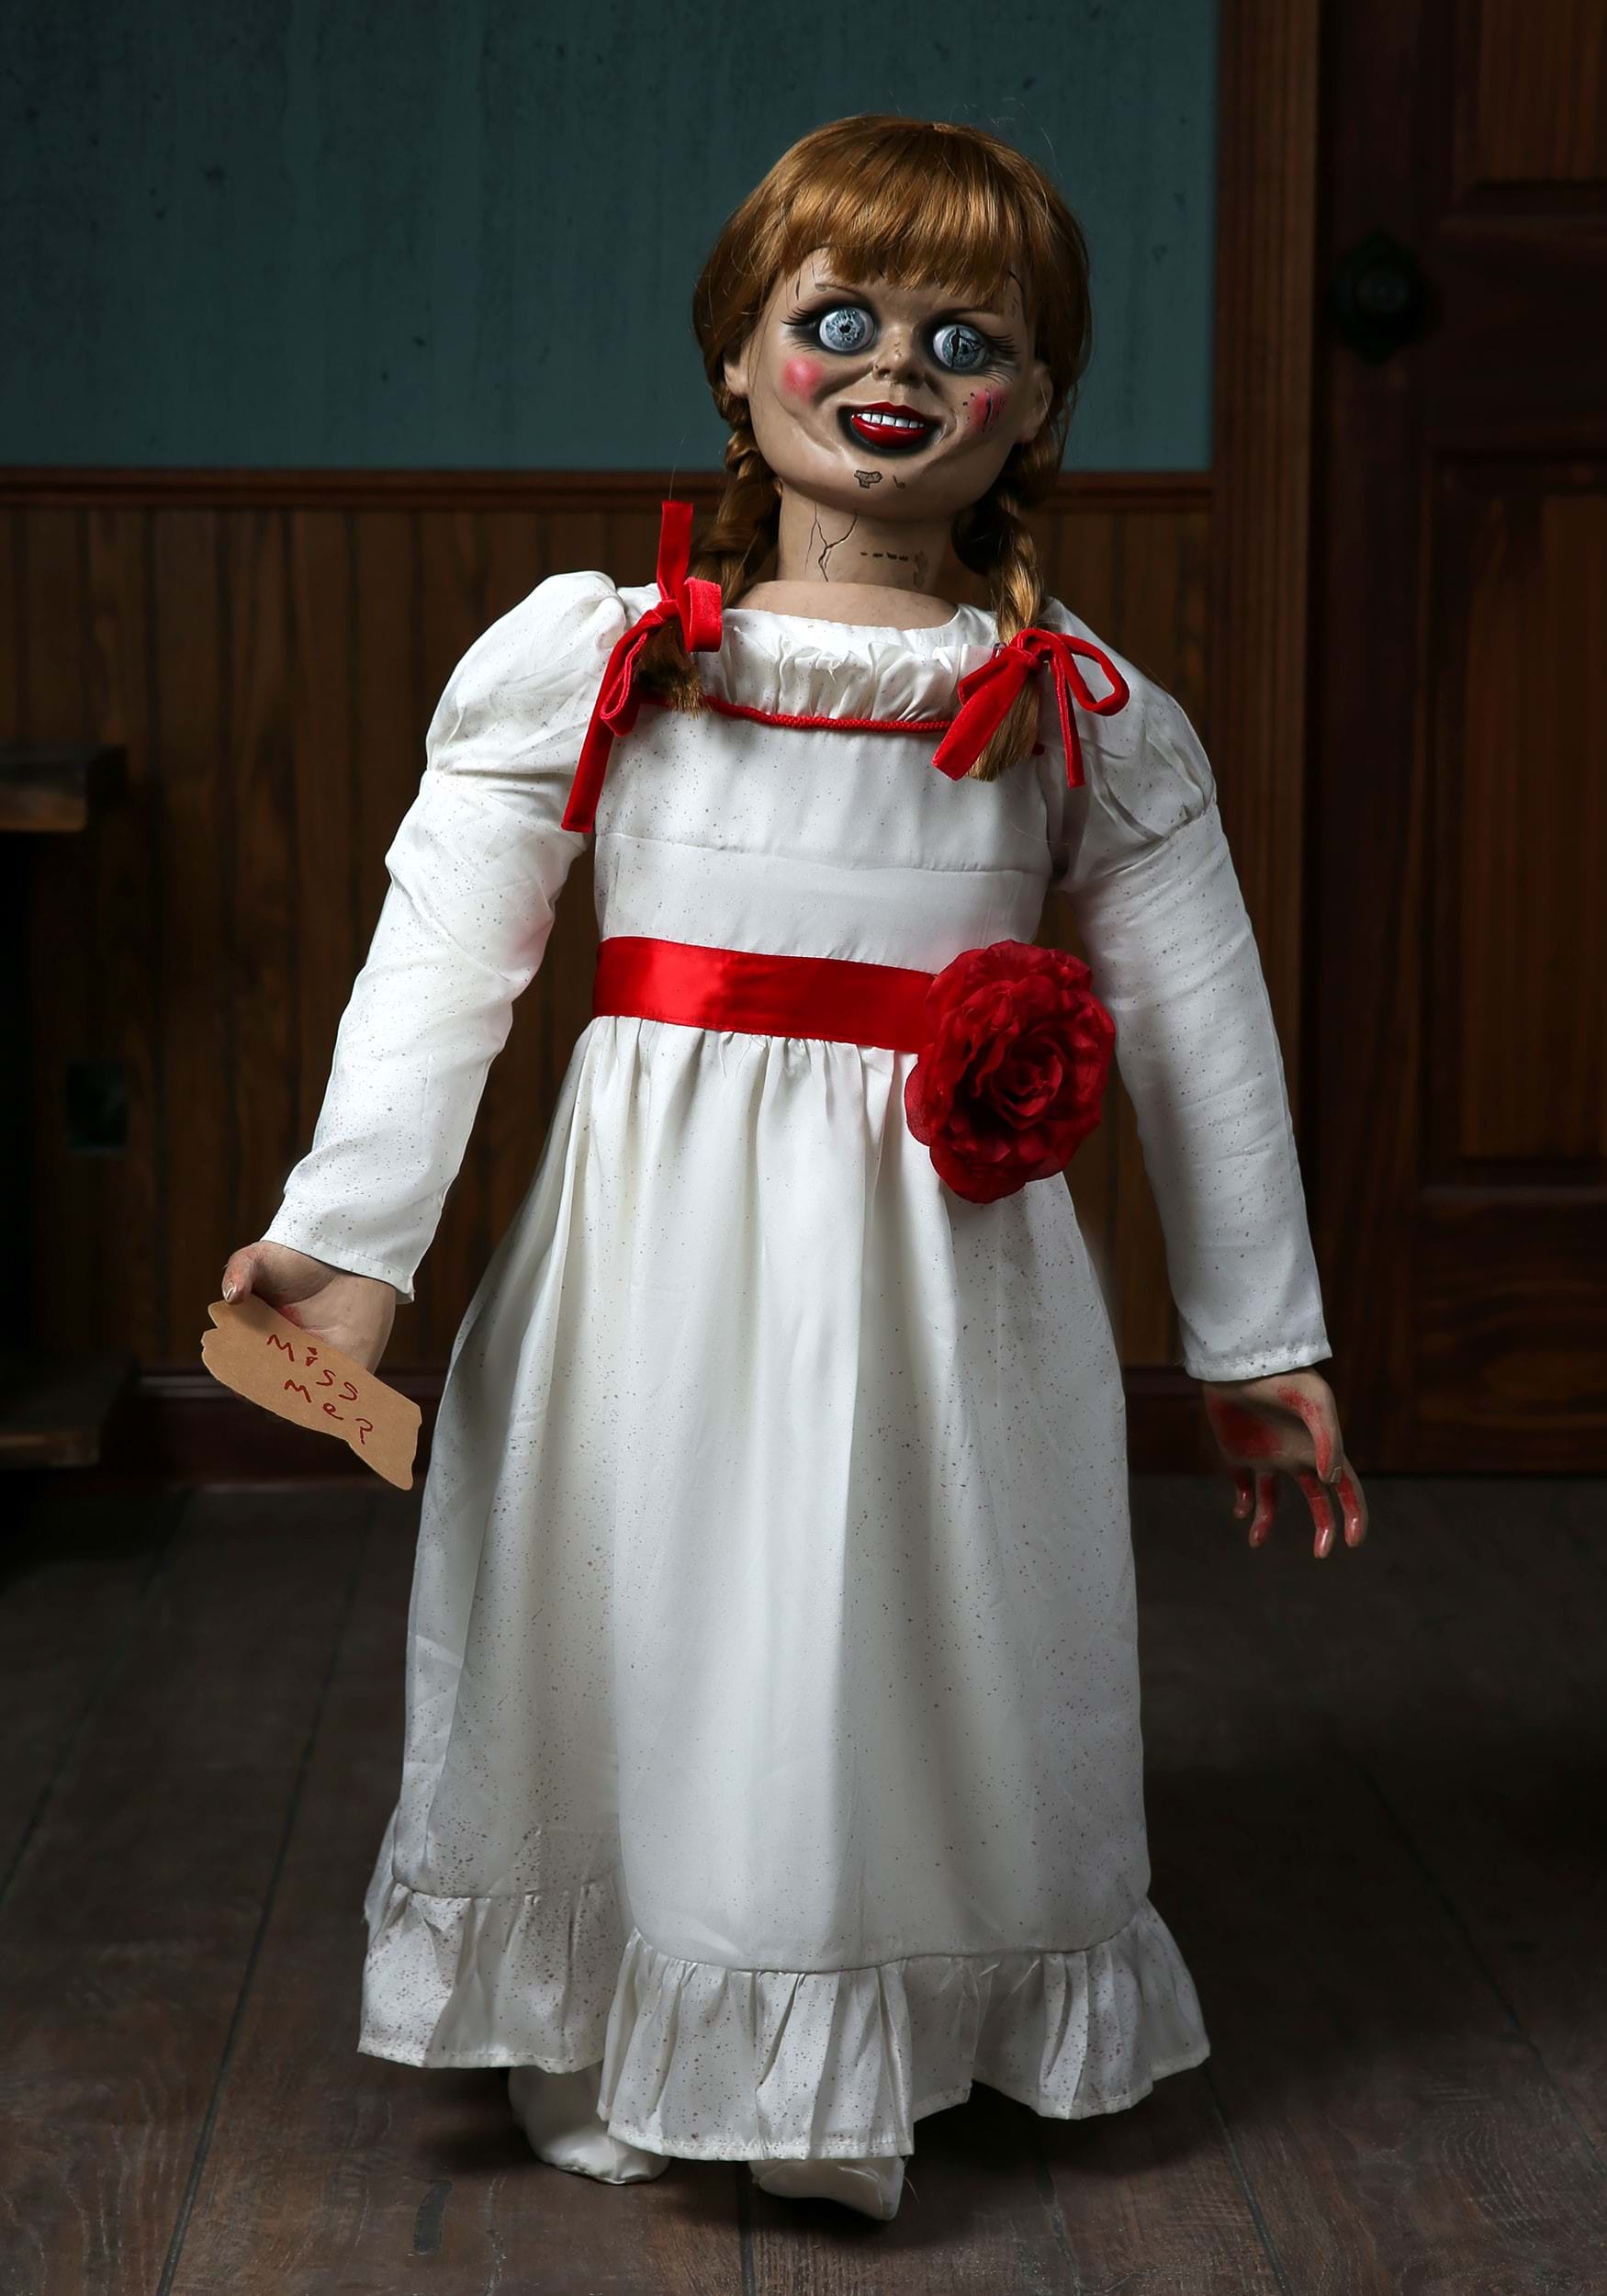 Collectors Annabelle The Conjuring Doll Prop